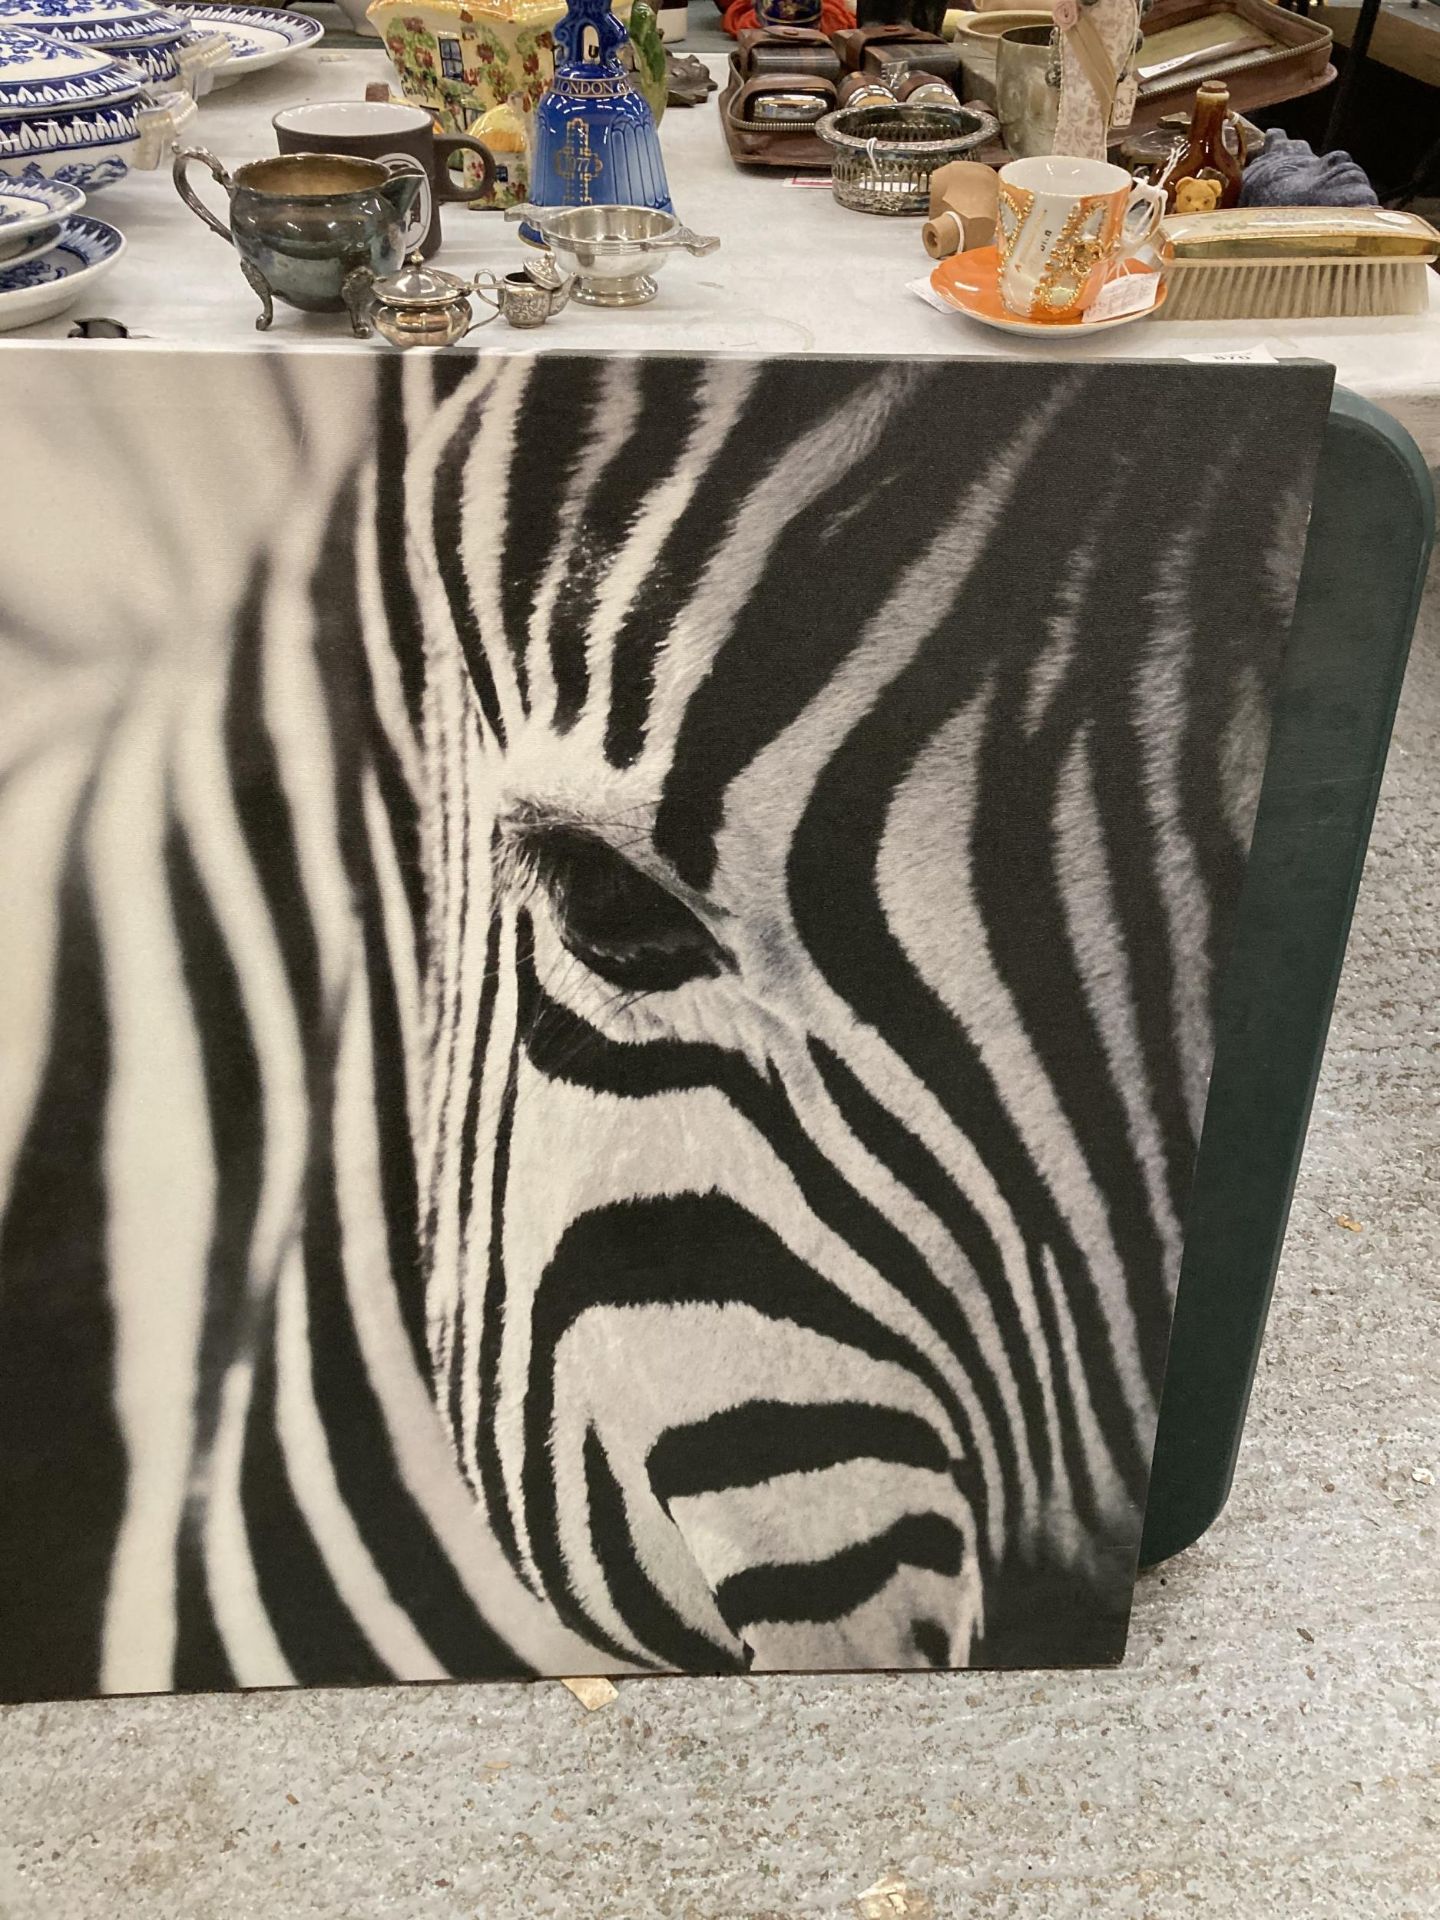 A LARGE PRINT ON CANVAS OF A ZEBRA, 118CM X 79CM - Image 2 of 2